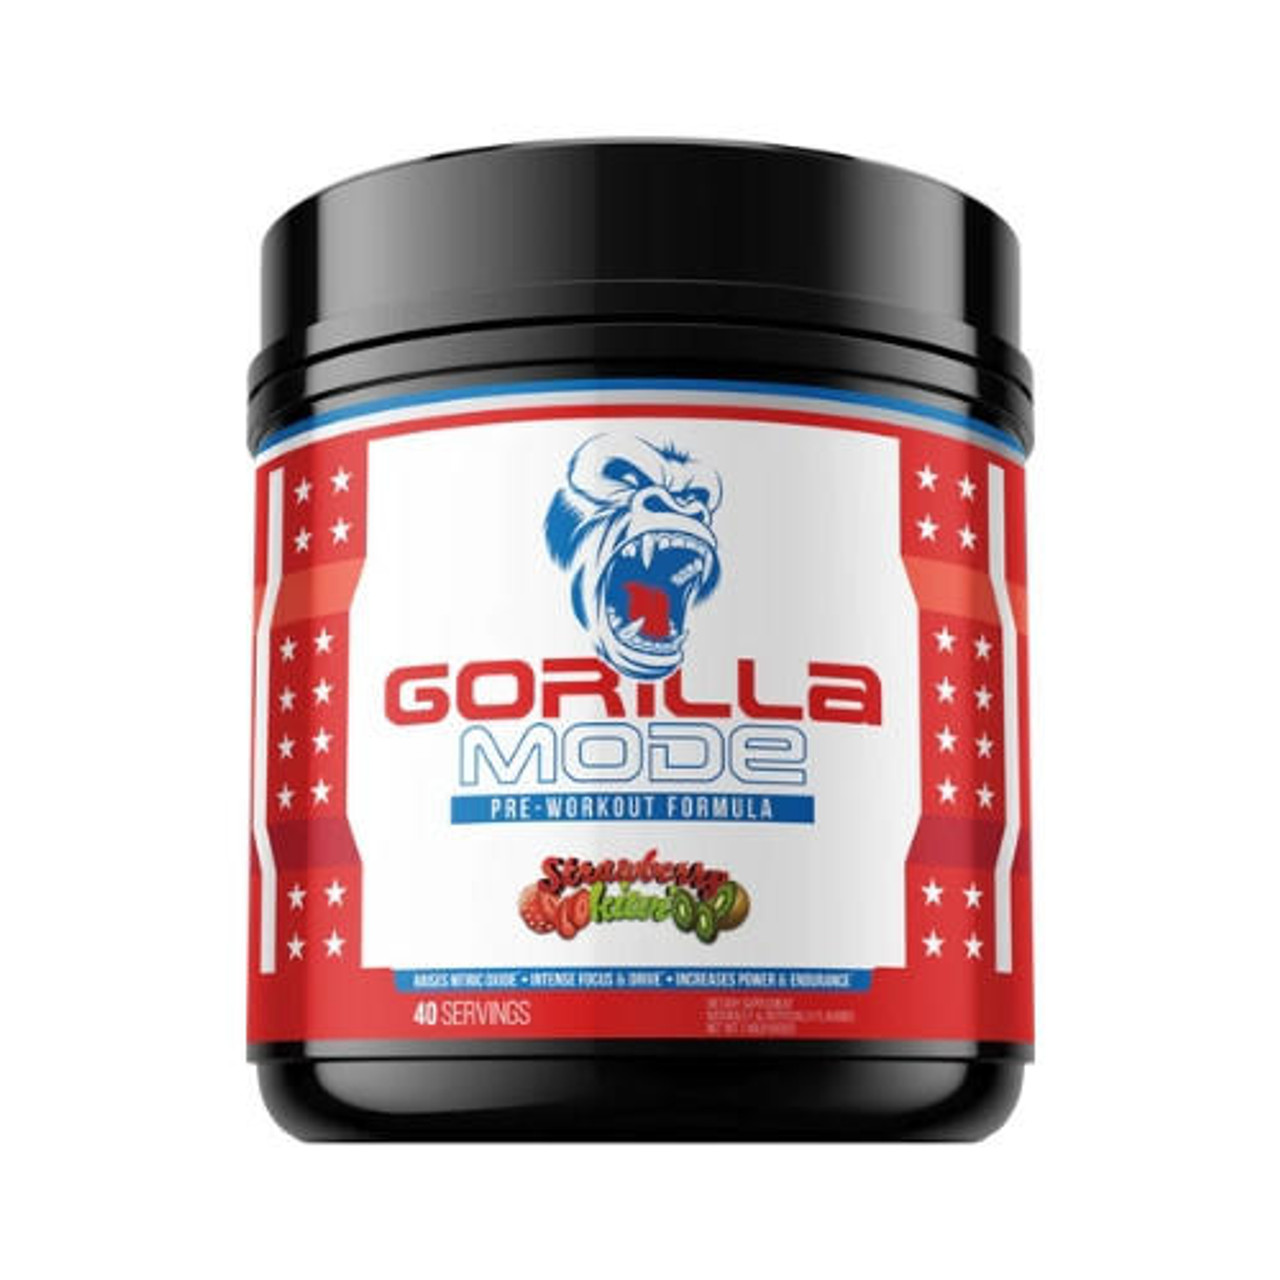 Gorilla Mind improves relaunches its testosterone boosting Sigma